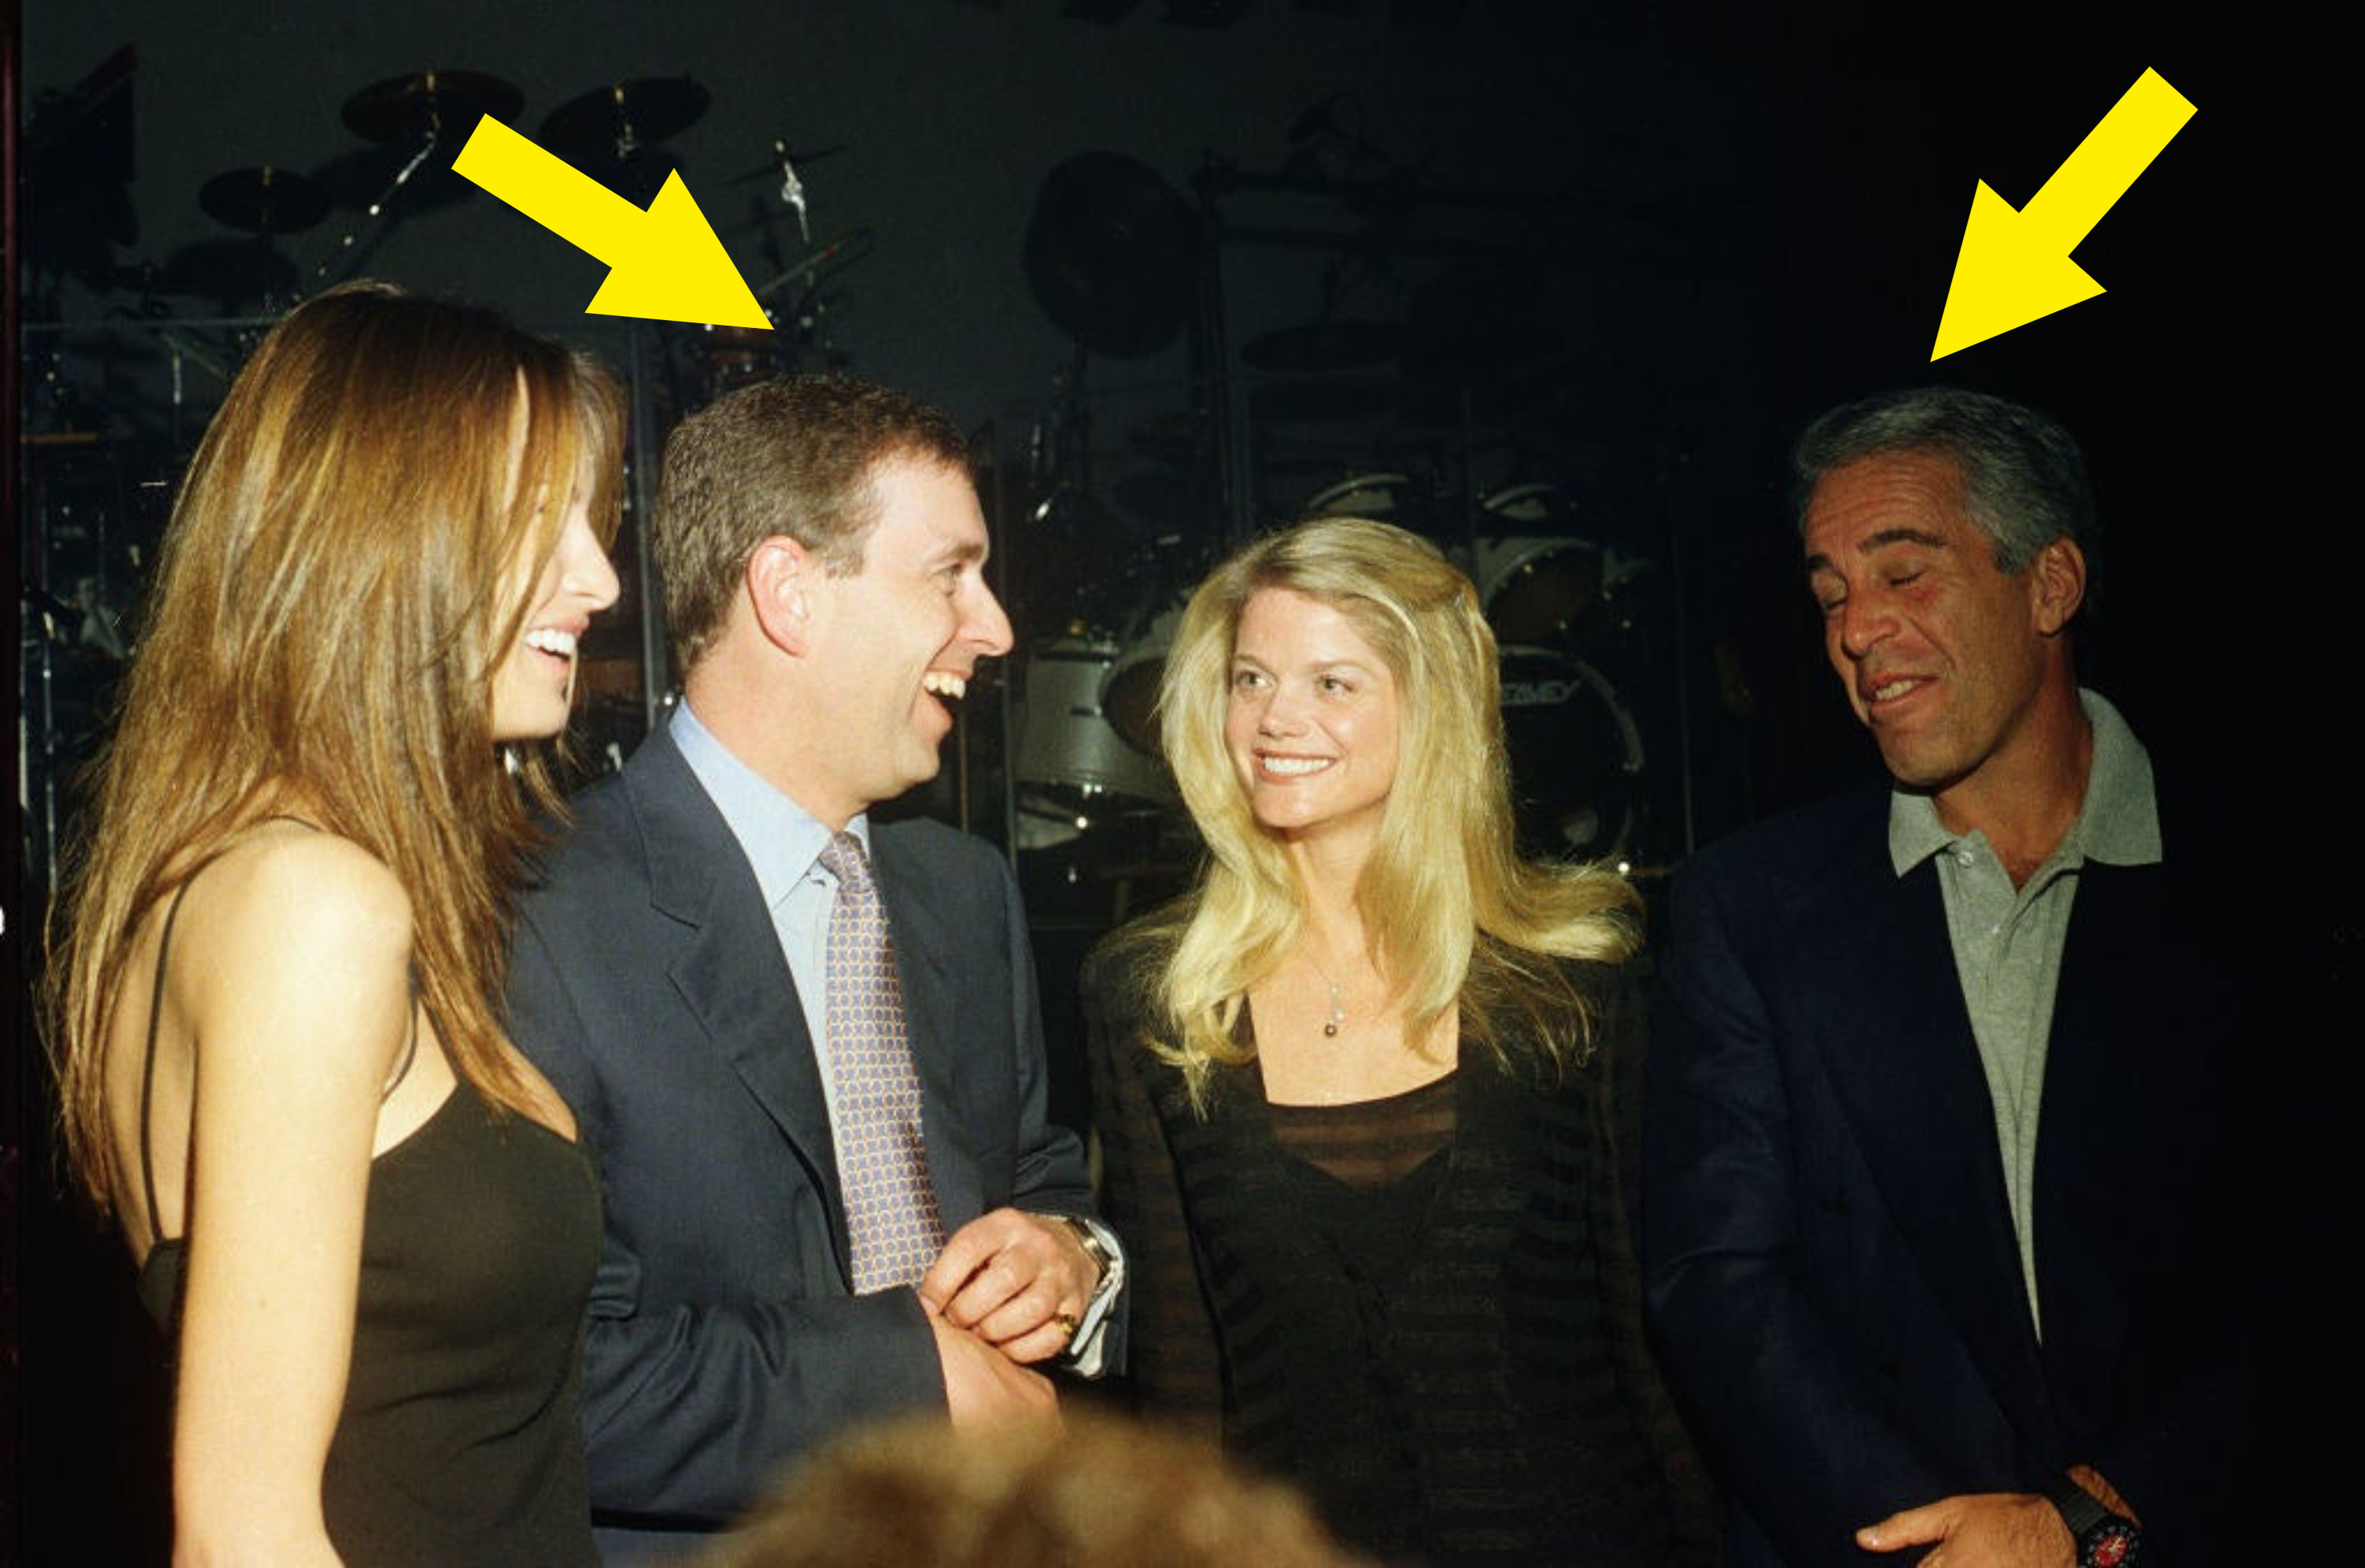 arrows pointing to Epstein and Prince Andrew at an event with two women at their sides